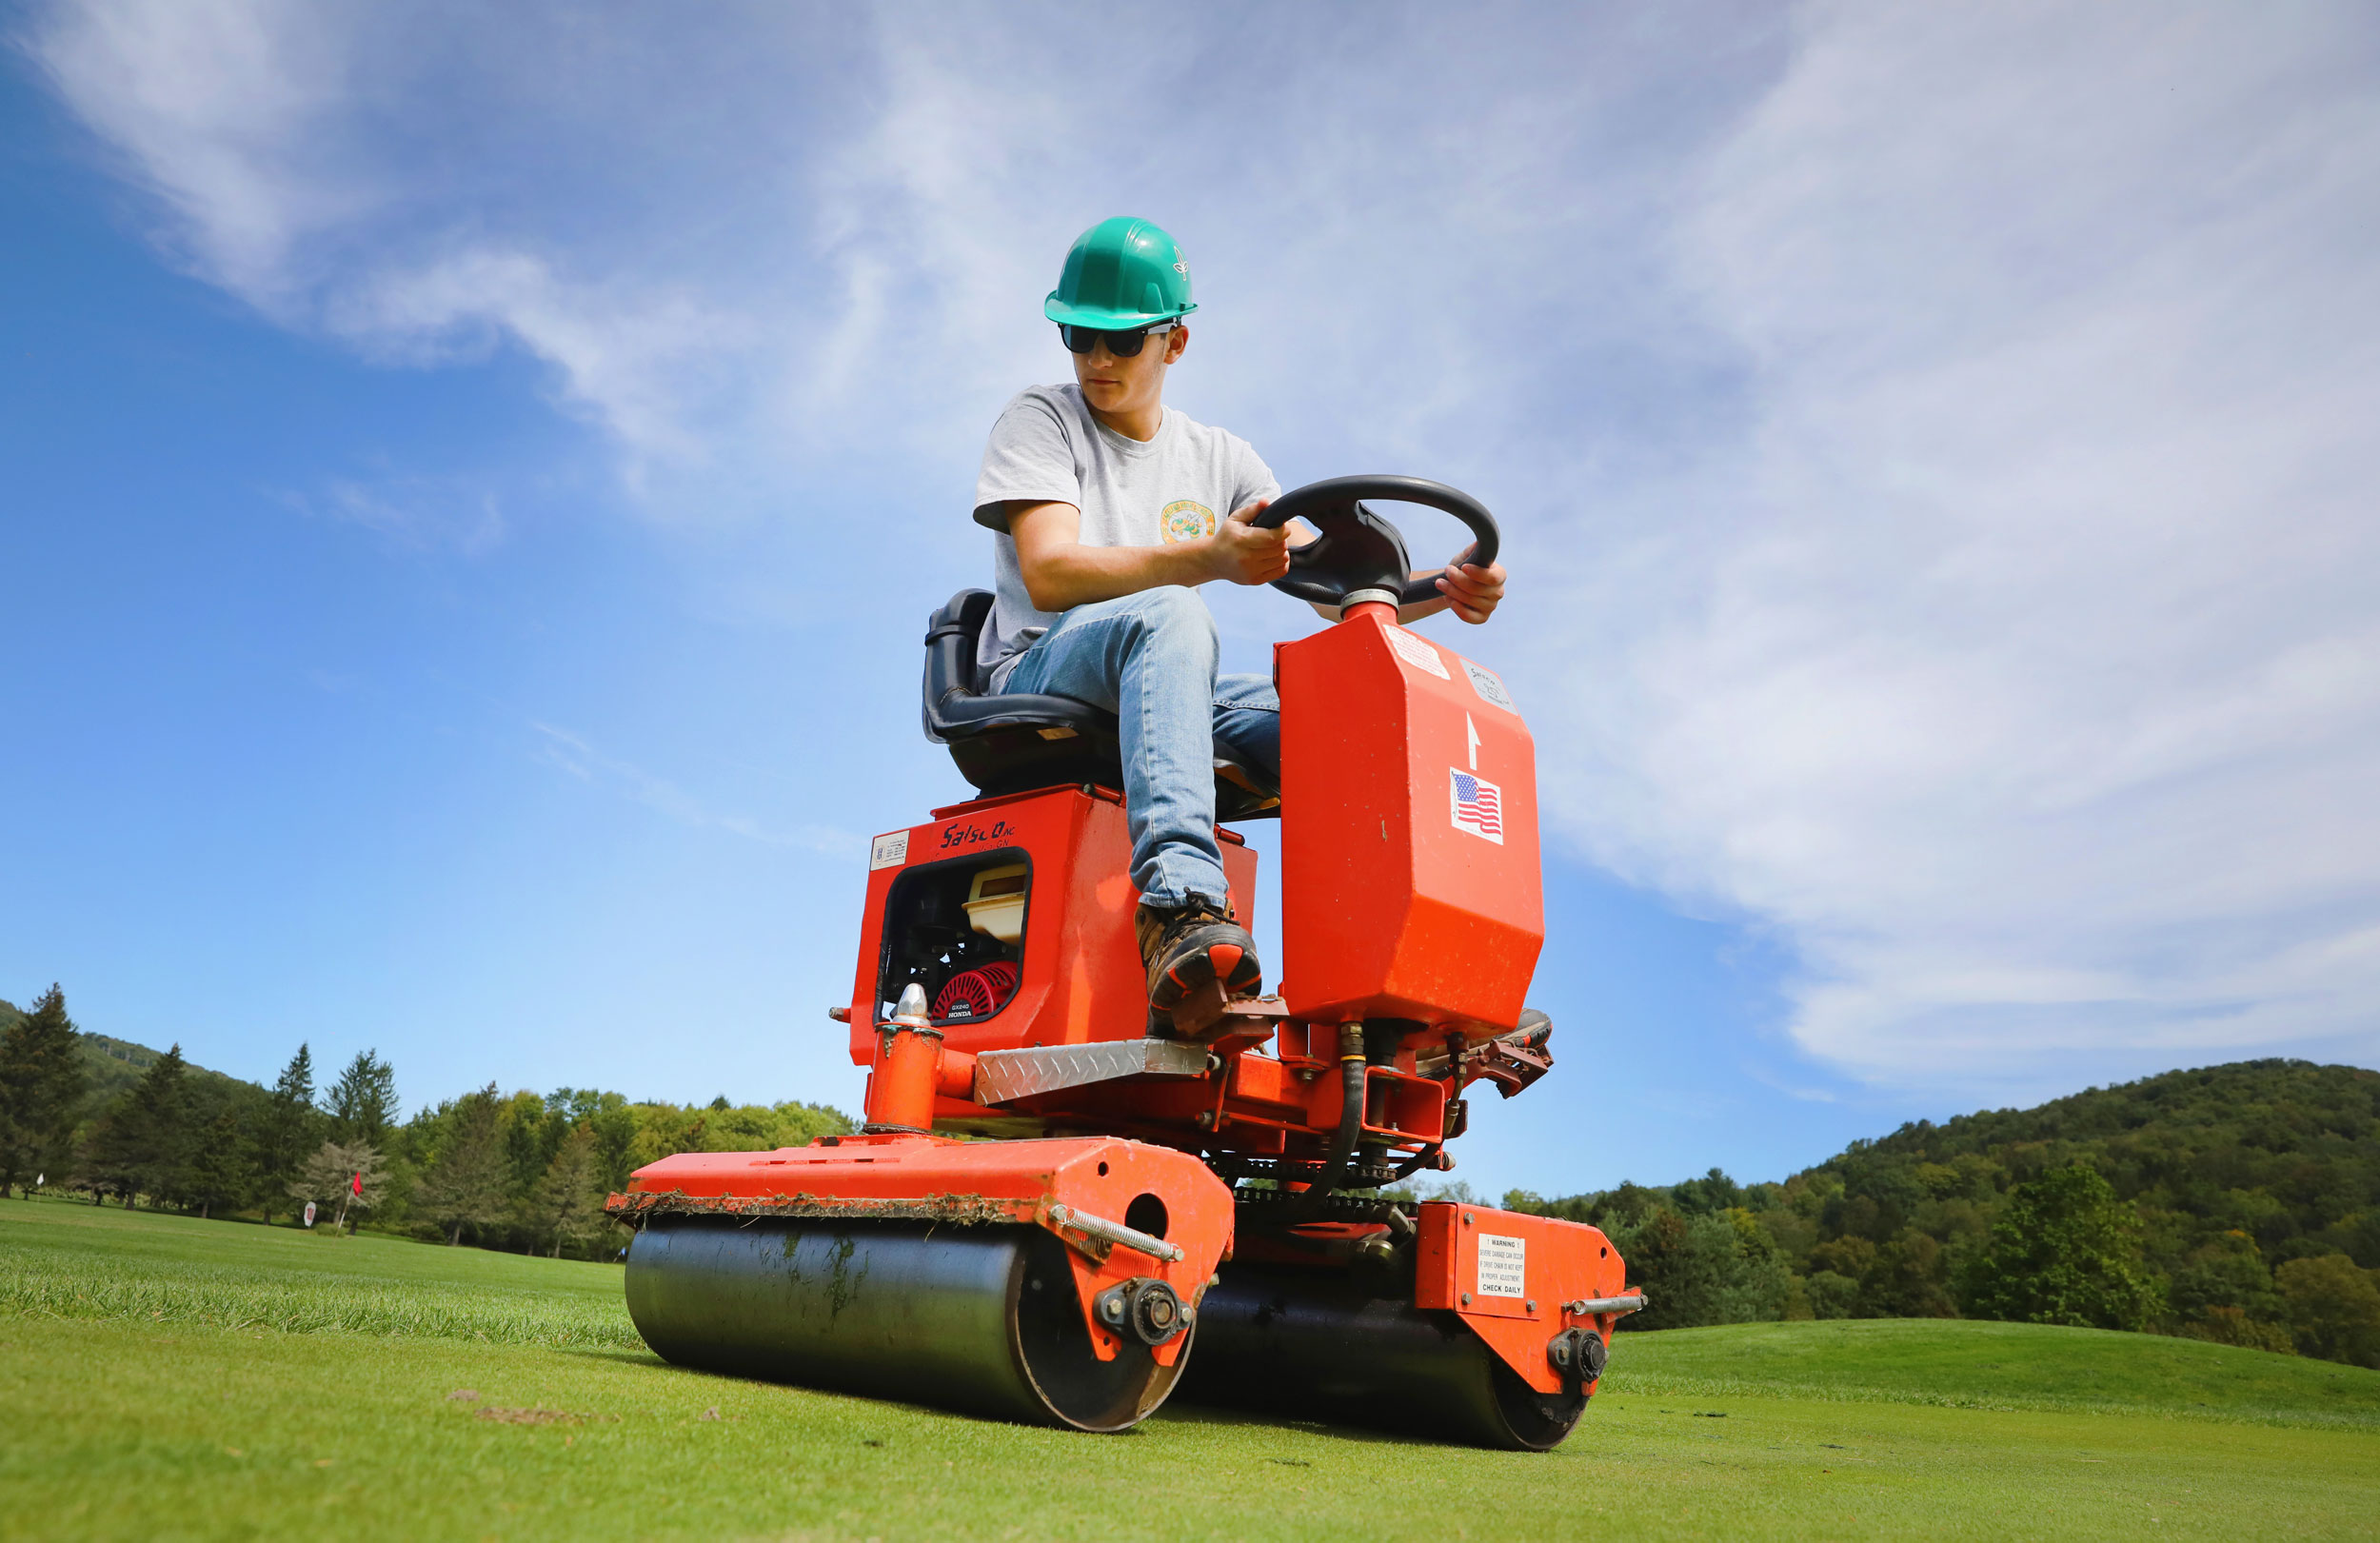 Student driving machinery on golf course